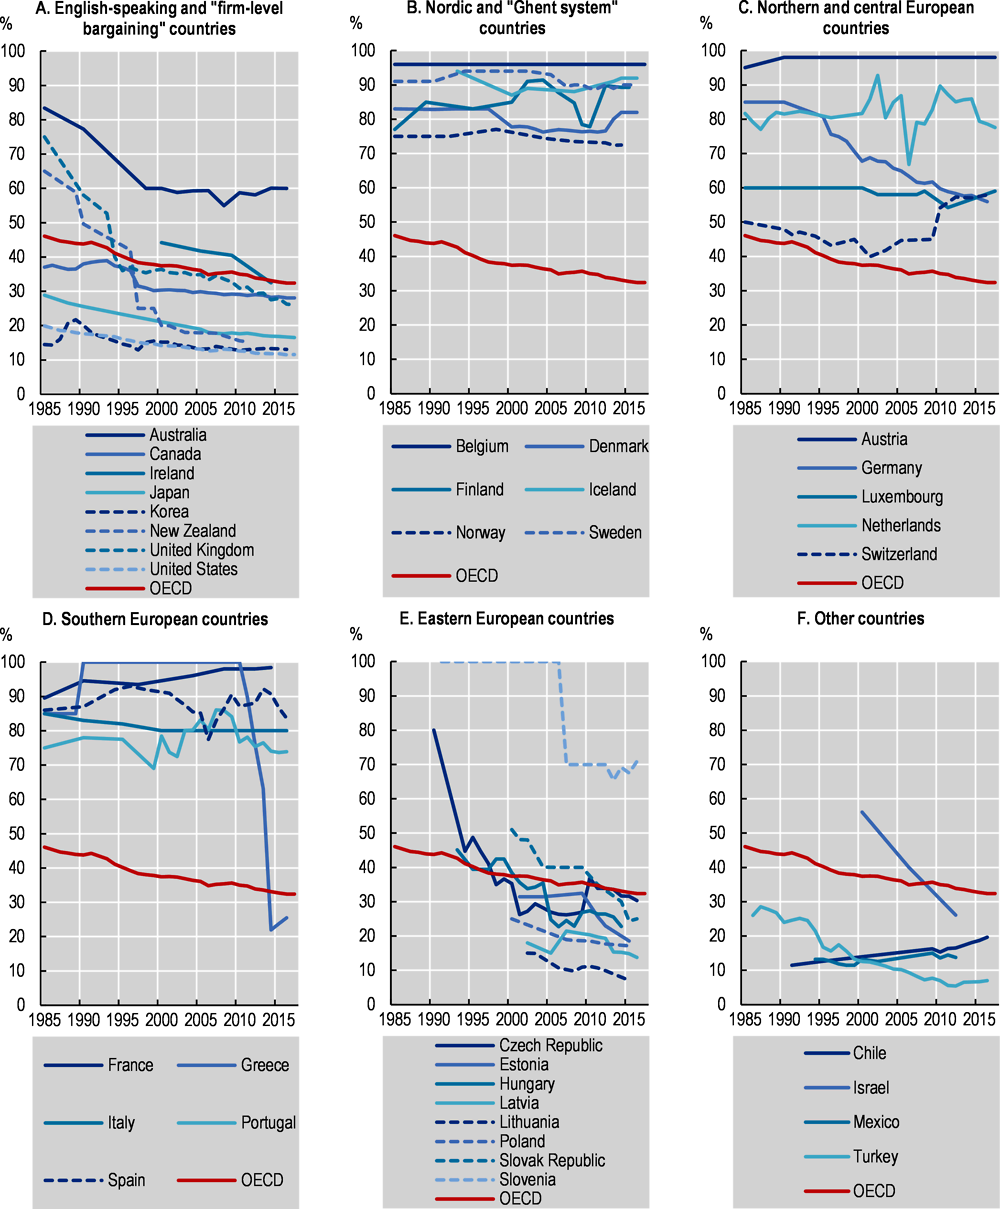 Figure 2.11. Trends in collective bargaining coverage rate